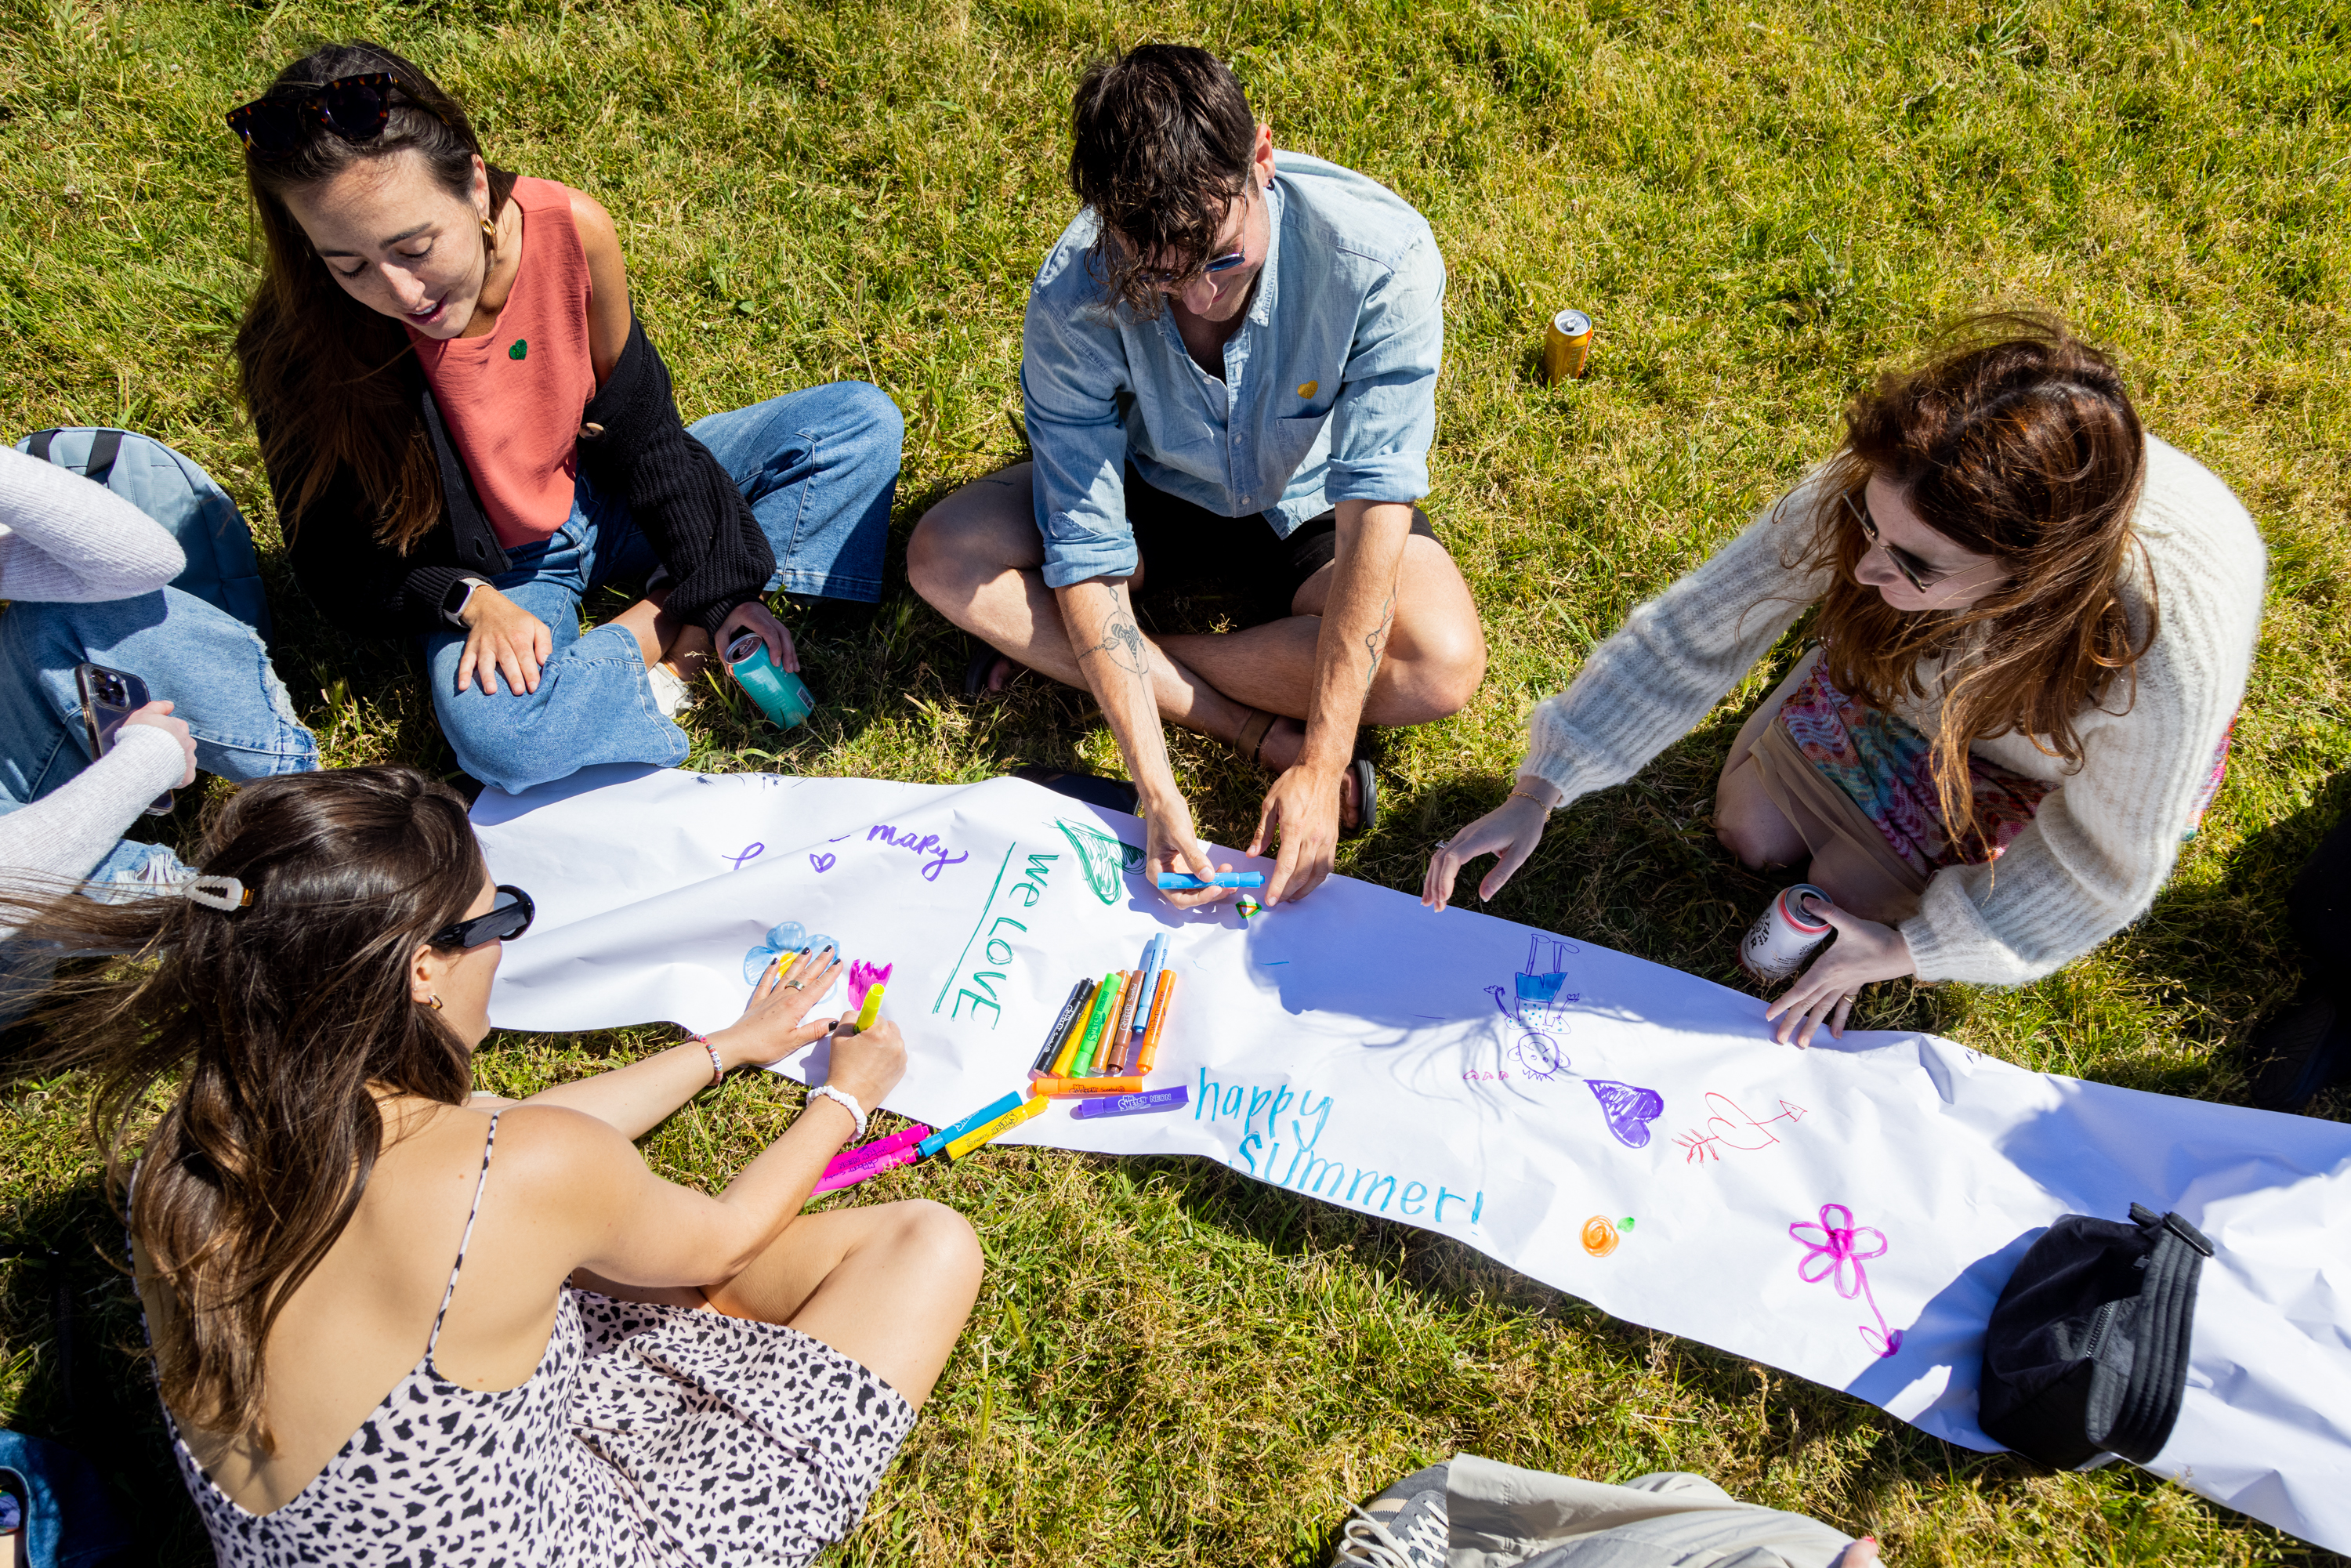 Four young people sit on grass, decorating a long banner with colorful markers, under a sunny sky. Their banner says &quot;happy summer!&quot; with artwork.